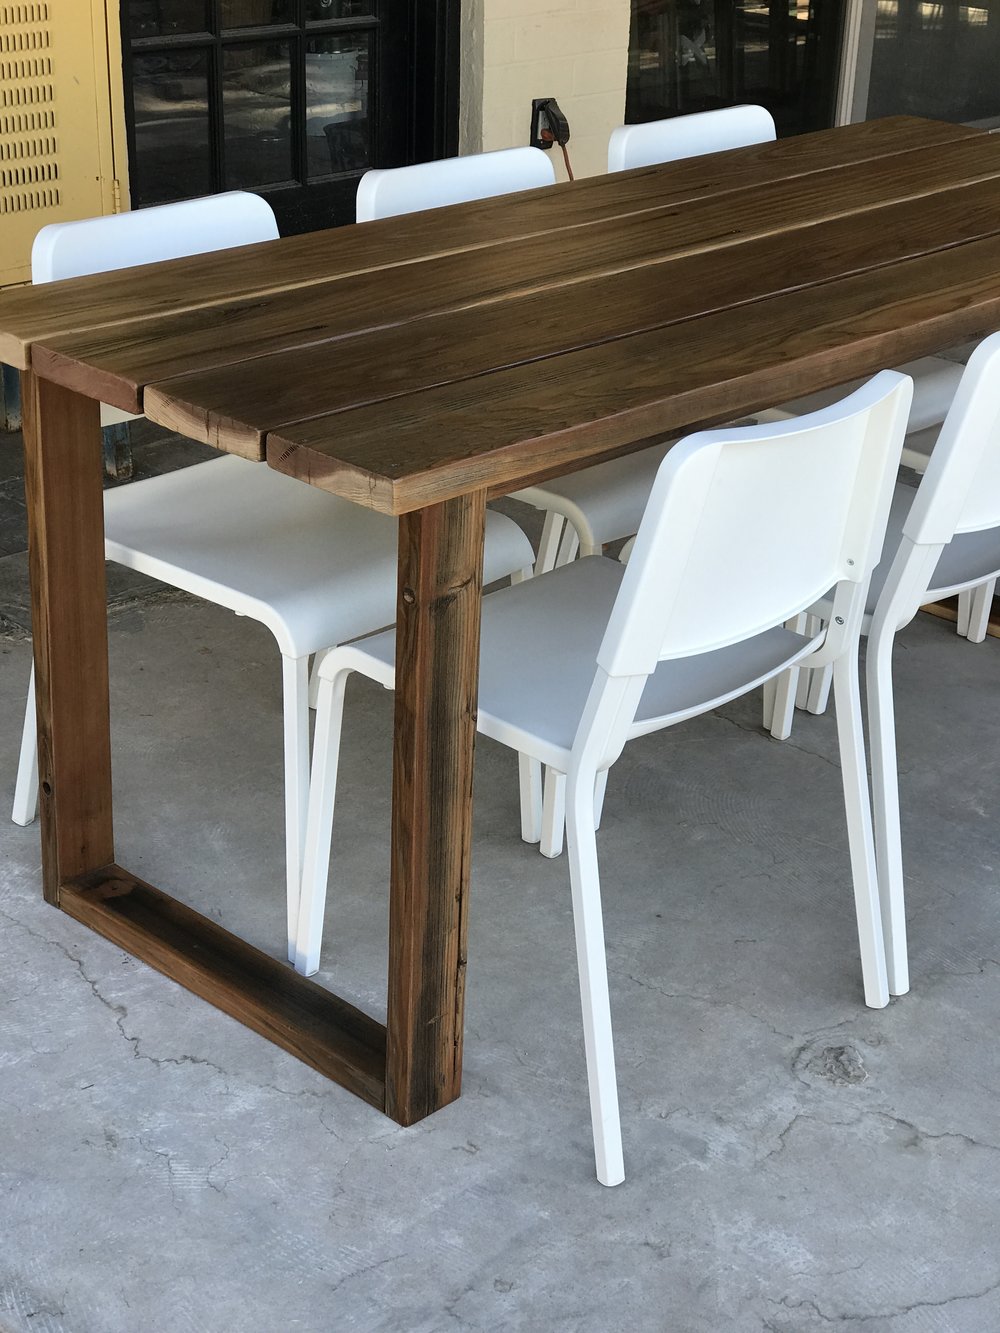 Diy Simple Outdoor Dining Table The